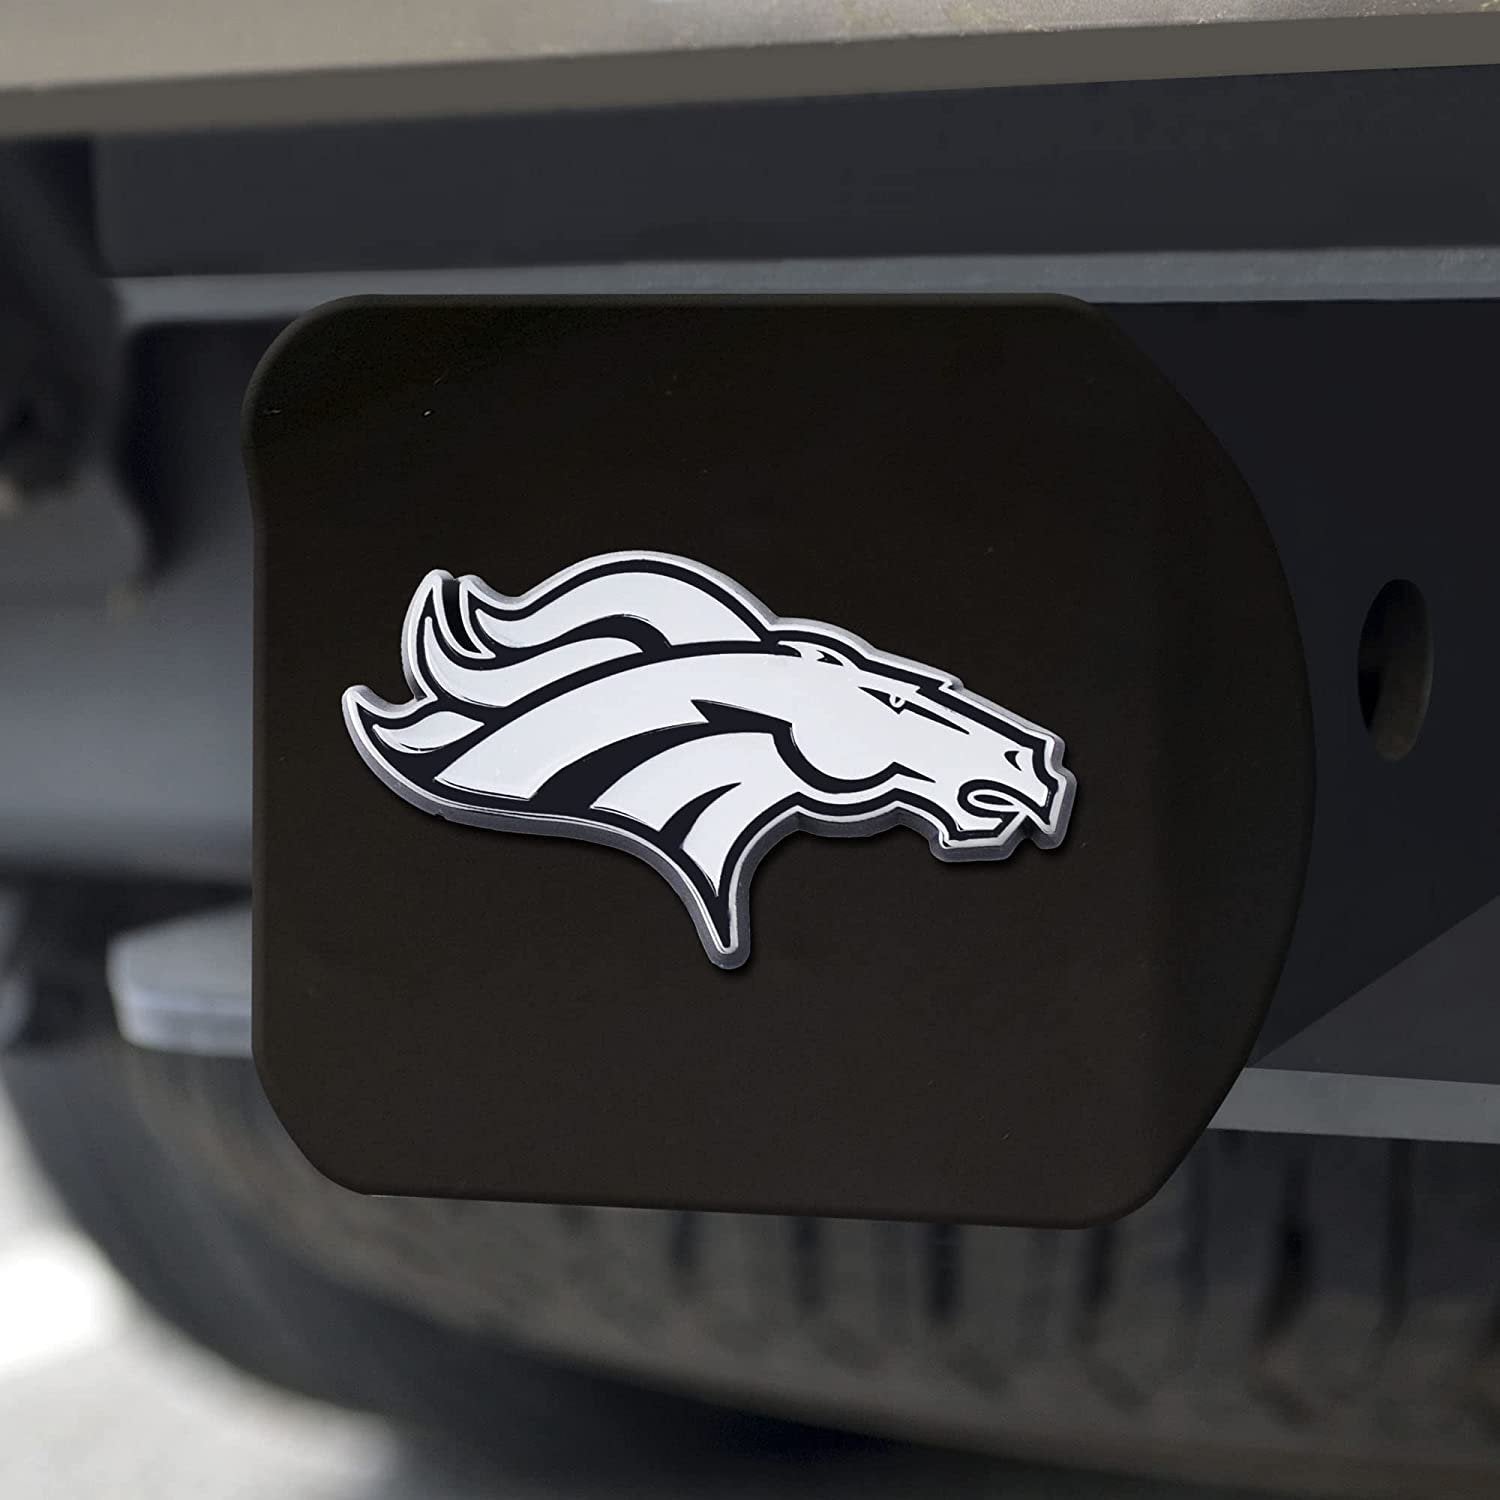 Denver Broncos Solid Metal Black Hitch Cover with Chrome Metal Emblem 2 Inch Square Type III